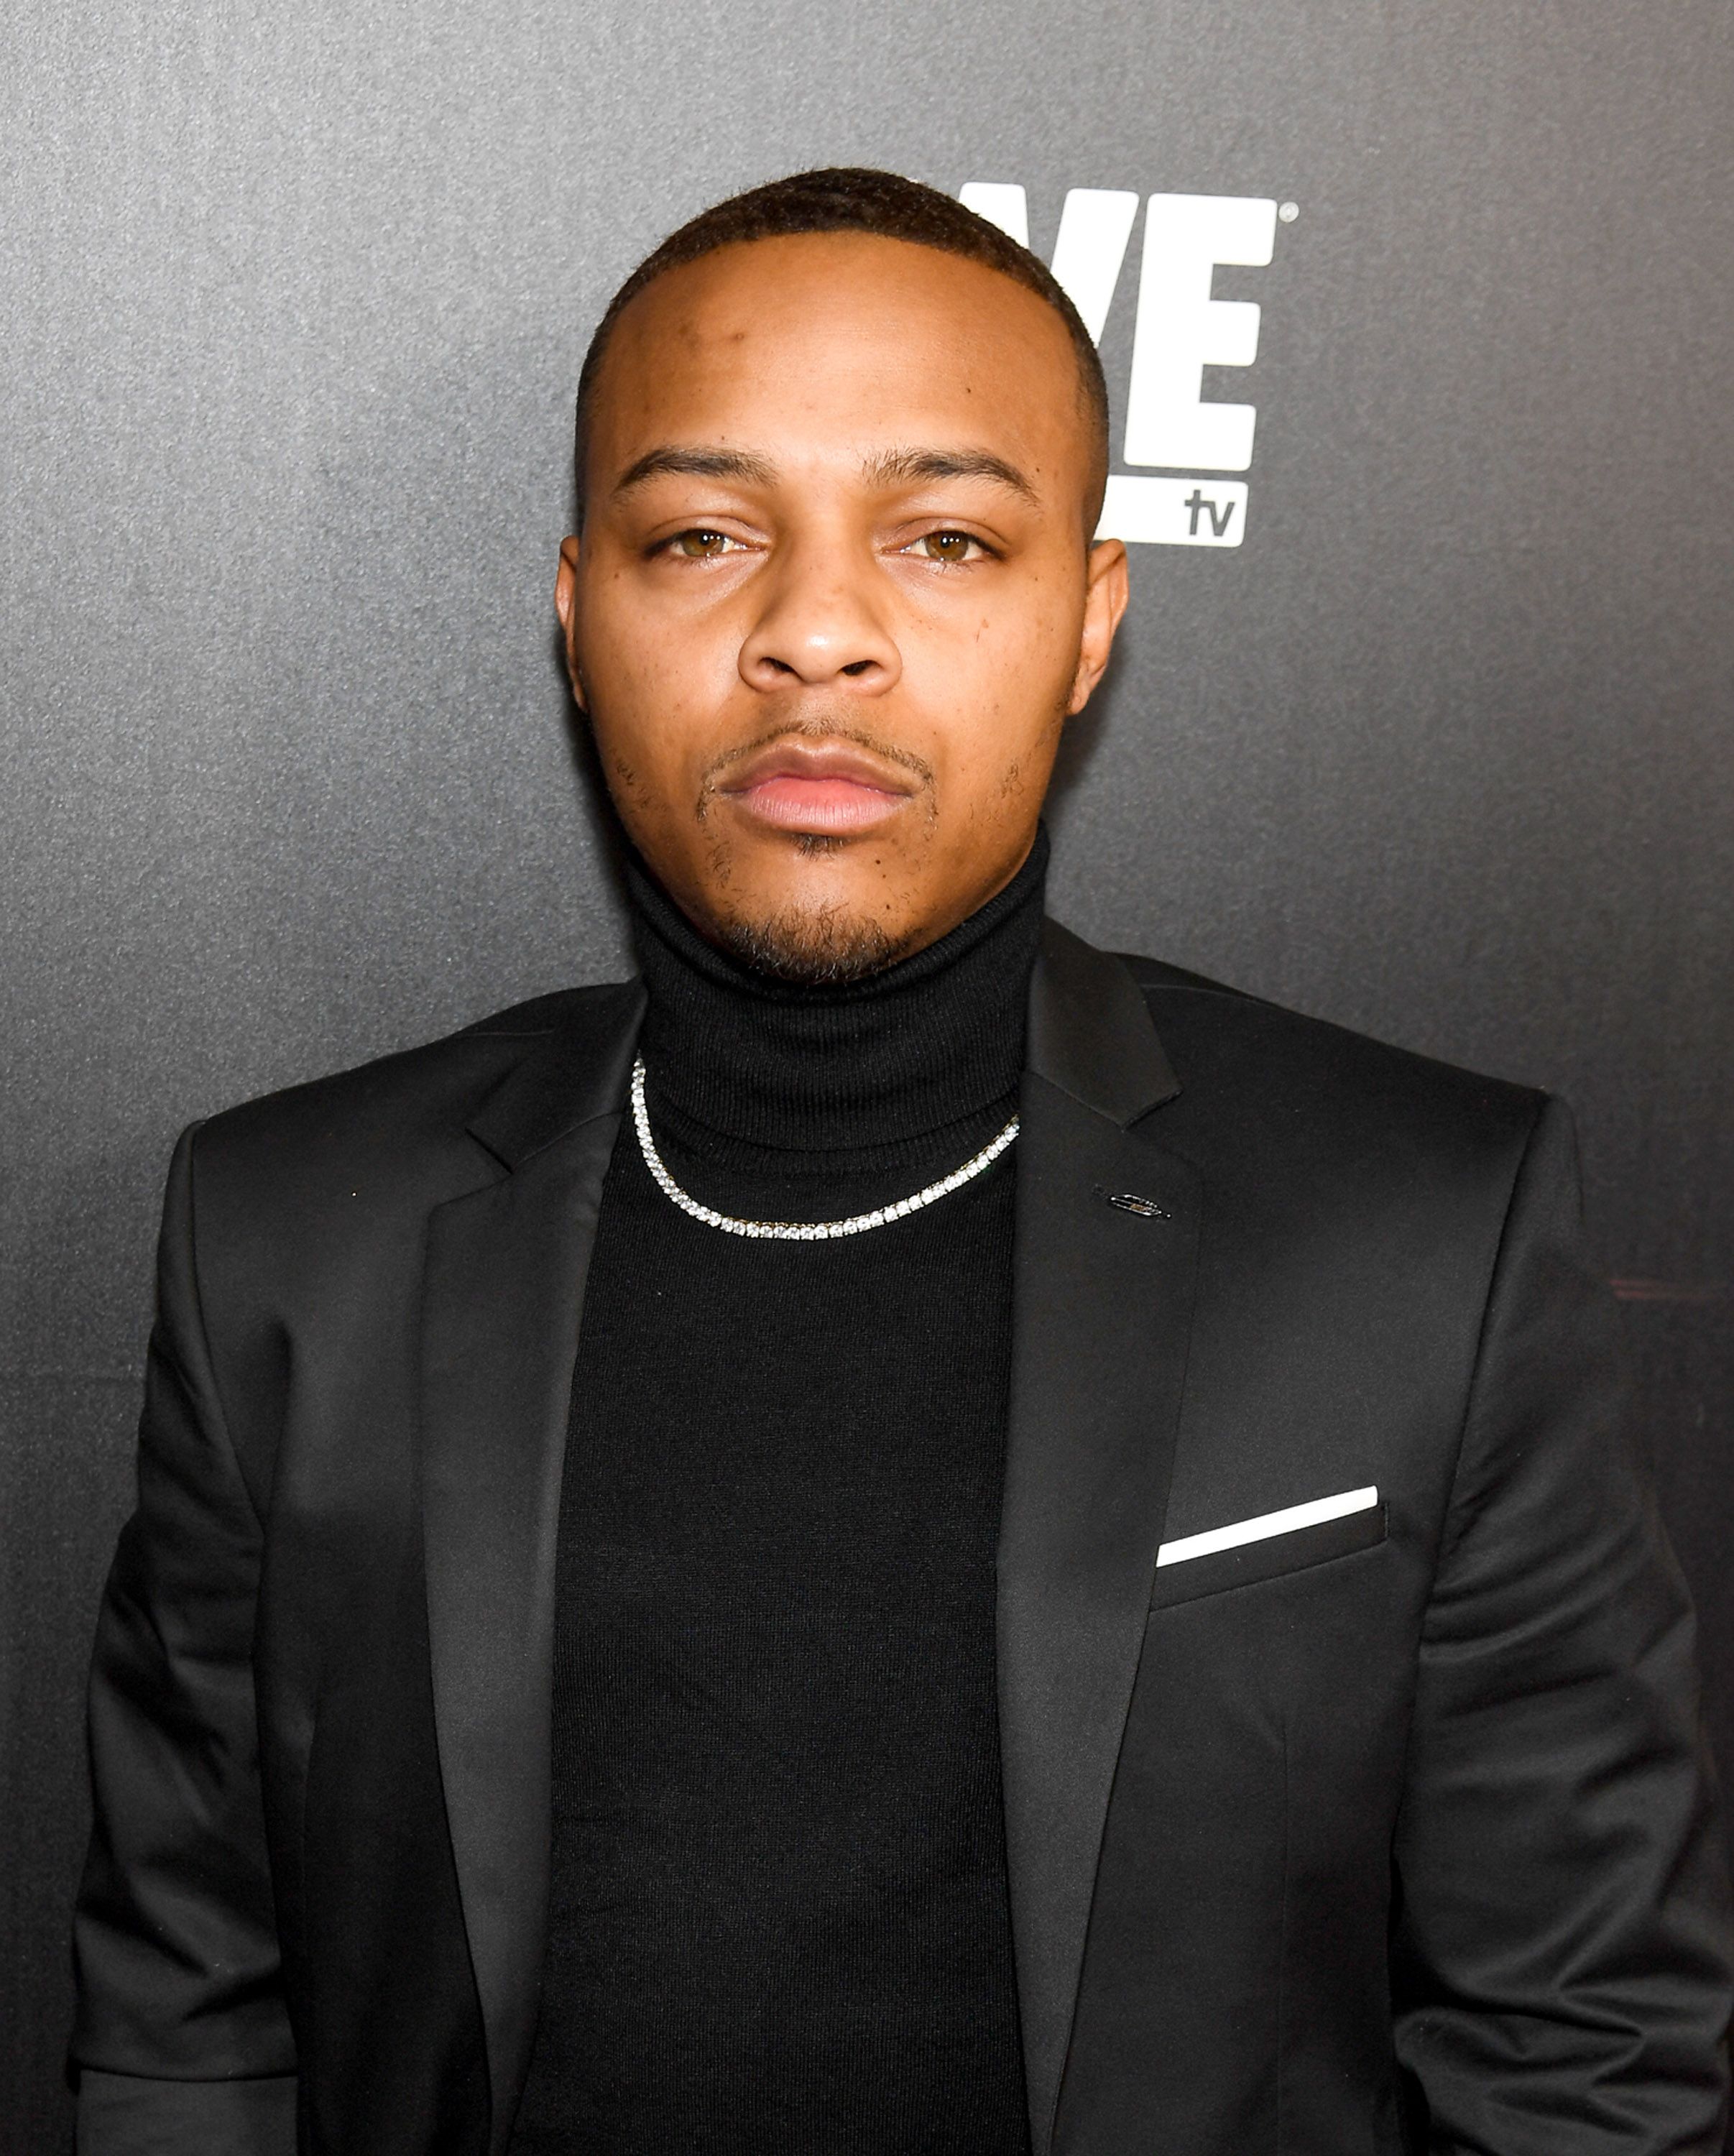 Shad Moss aka Bow Wow during the "Growing Up Hip Hop Atlanta" season 2 premiere party at Woodruff Arts Center on January 9, 2018. | Photo: Getty Images